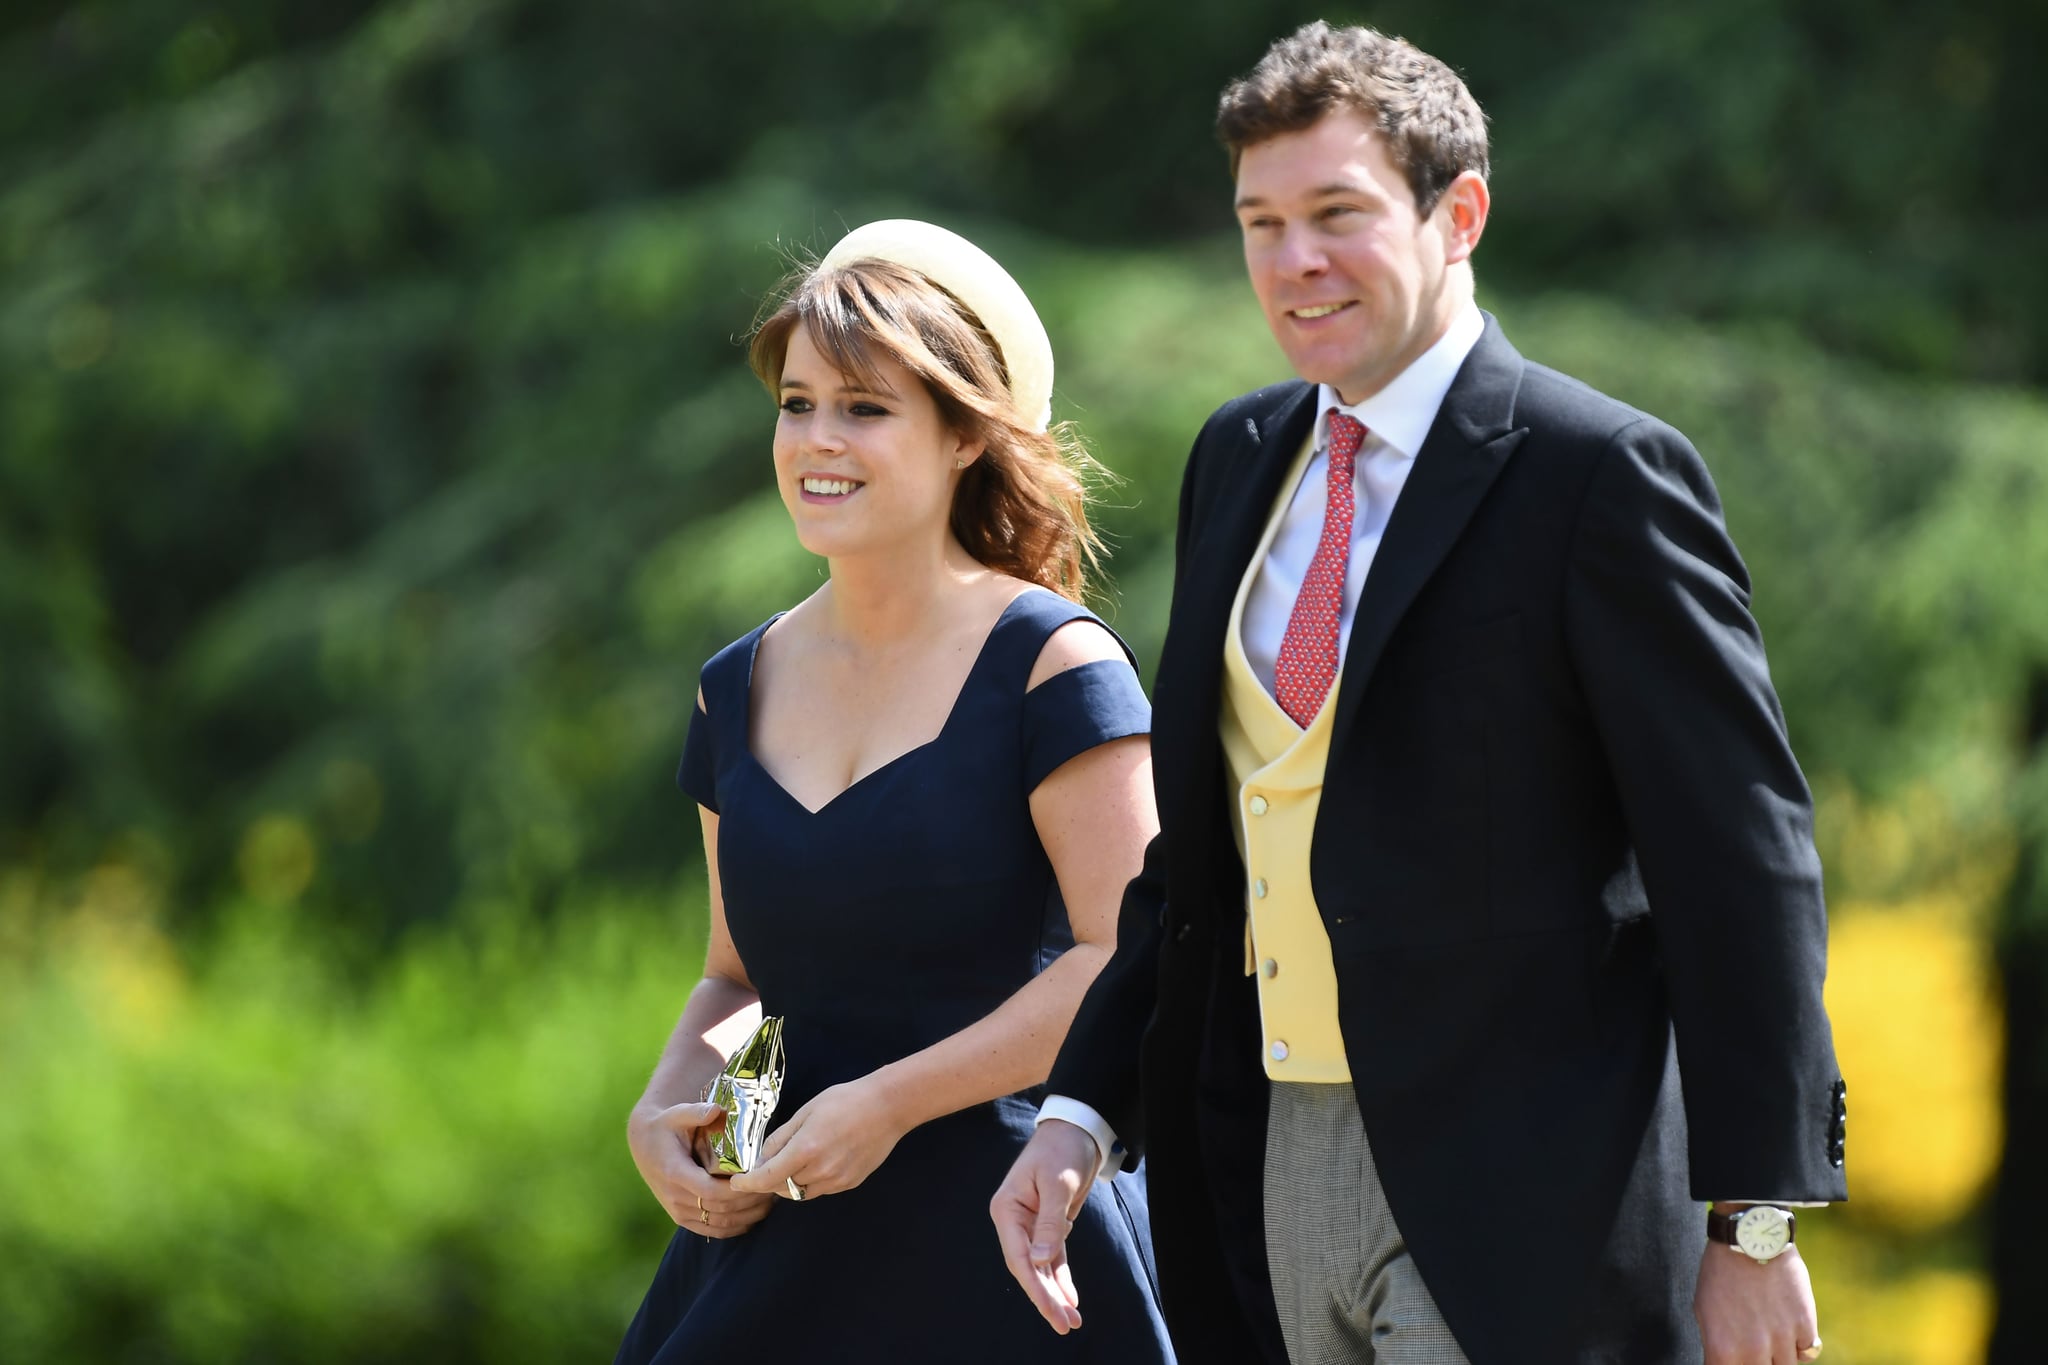 CORRECTION - Britain's Princess Eugenie of York (L) attends the wedding of Pippa Middleton and James Matthews at St Mark's Church in Englefield, west of London, on May 20, 2017.Pippa Middleton hit the headlines with a figure-hugging outfit at her sister Kate's wedding to Prince William but now the world-famous bridesmaid is becoming a bride herself. Once again, all eyes will be on her dress as the 33-year-old marries financier James Matthews on Saturday at a lavish society wedding where William and Kate's children will play starring roles. / AFP PHOTO / POOL / Justin TALLIS / The erroneous mention[s] appearing in the metadata of this photo by Justin TALLIS has been modified in AFP systems in the following manner: [Britain's Princess Eugenie of York] instead of [Britain's Princess Beatrice of York]. Please immediately remove the erroneous mention[s] from all your online services and delete it (them) from your servers. If you have been authorized by AFP to distribute it (them) to third parties, please ensure that the same actions are carried out by them. Failure to promptly comply with these instructions will entail liability on your part for any continued or post notification usage. Therefore we thank you very much for all your attention and prompt action. We are sorry for the inconvenience this notification may cause and remain at your disposal for any further information you may require.        (Photo credit should read JUSTIN TALLIS/AFP/Getty Images)